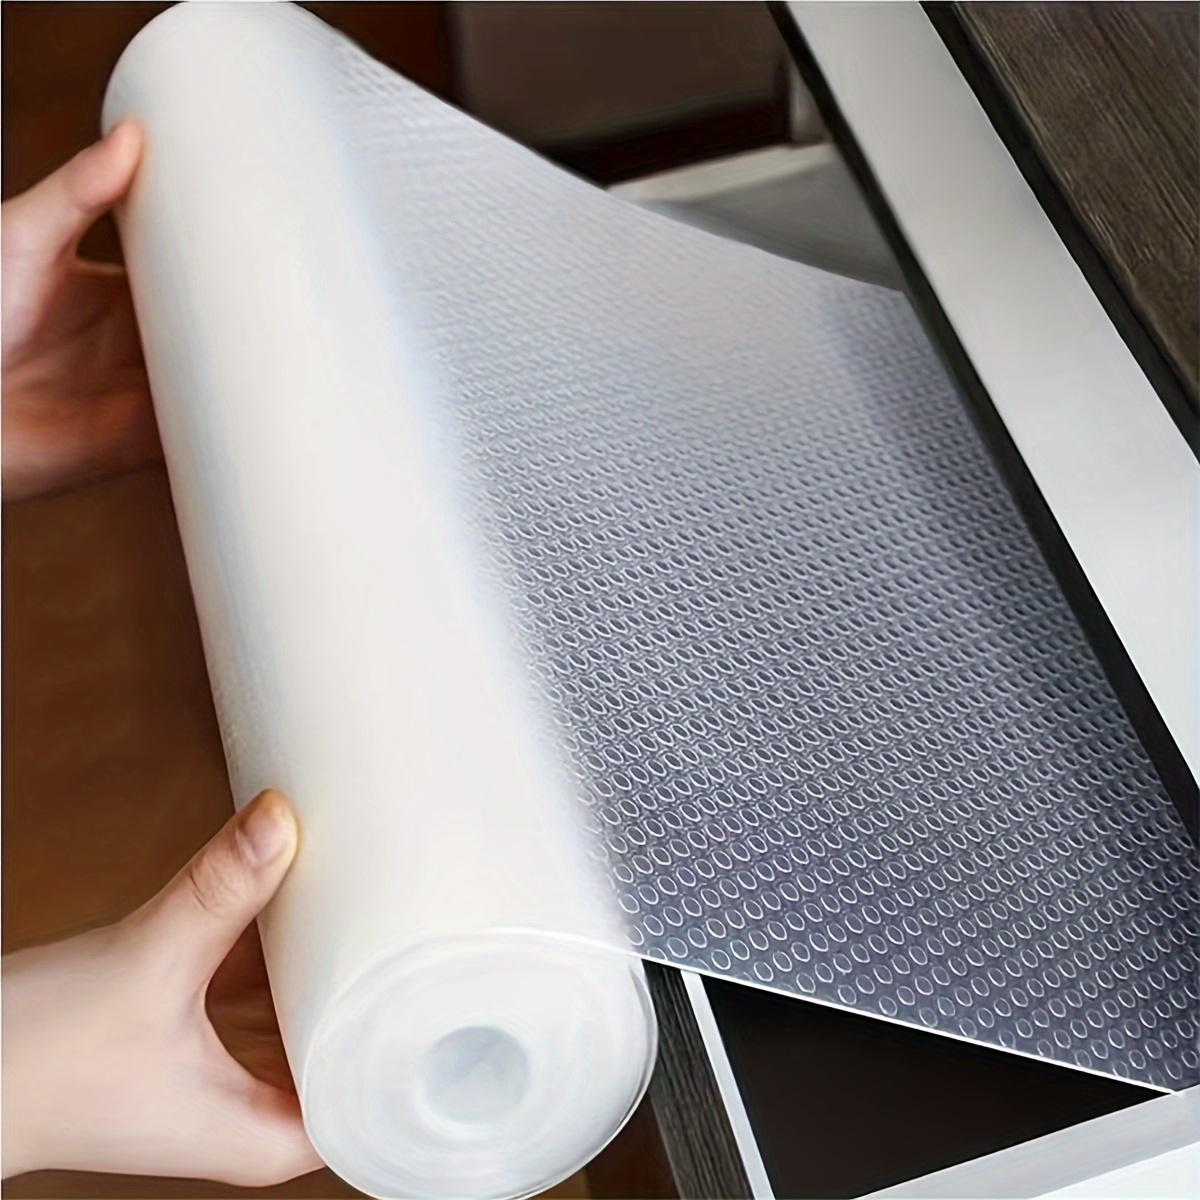 Bloss Plastic Shelf and Drawer Liner Non Adhesive Cupboard Liner Waterproof Shelf Liners for Cabinets, Storage, Desks, Bathroom, Kitchen - Grey 17.7